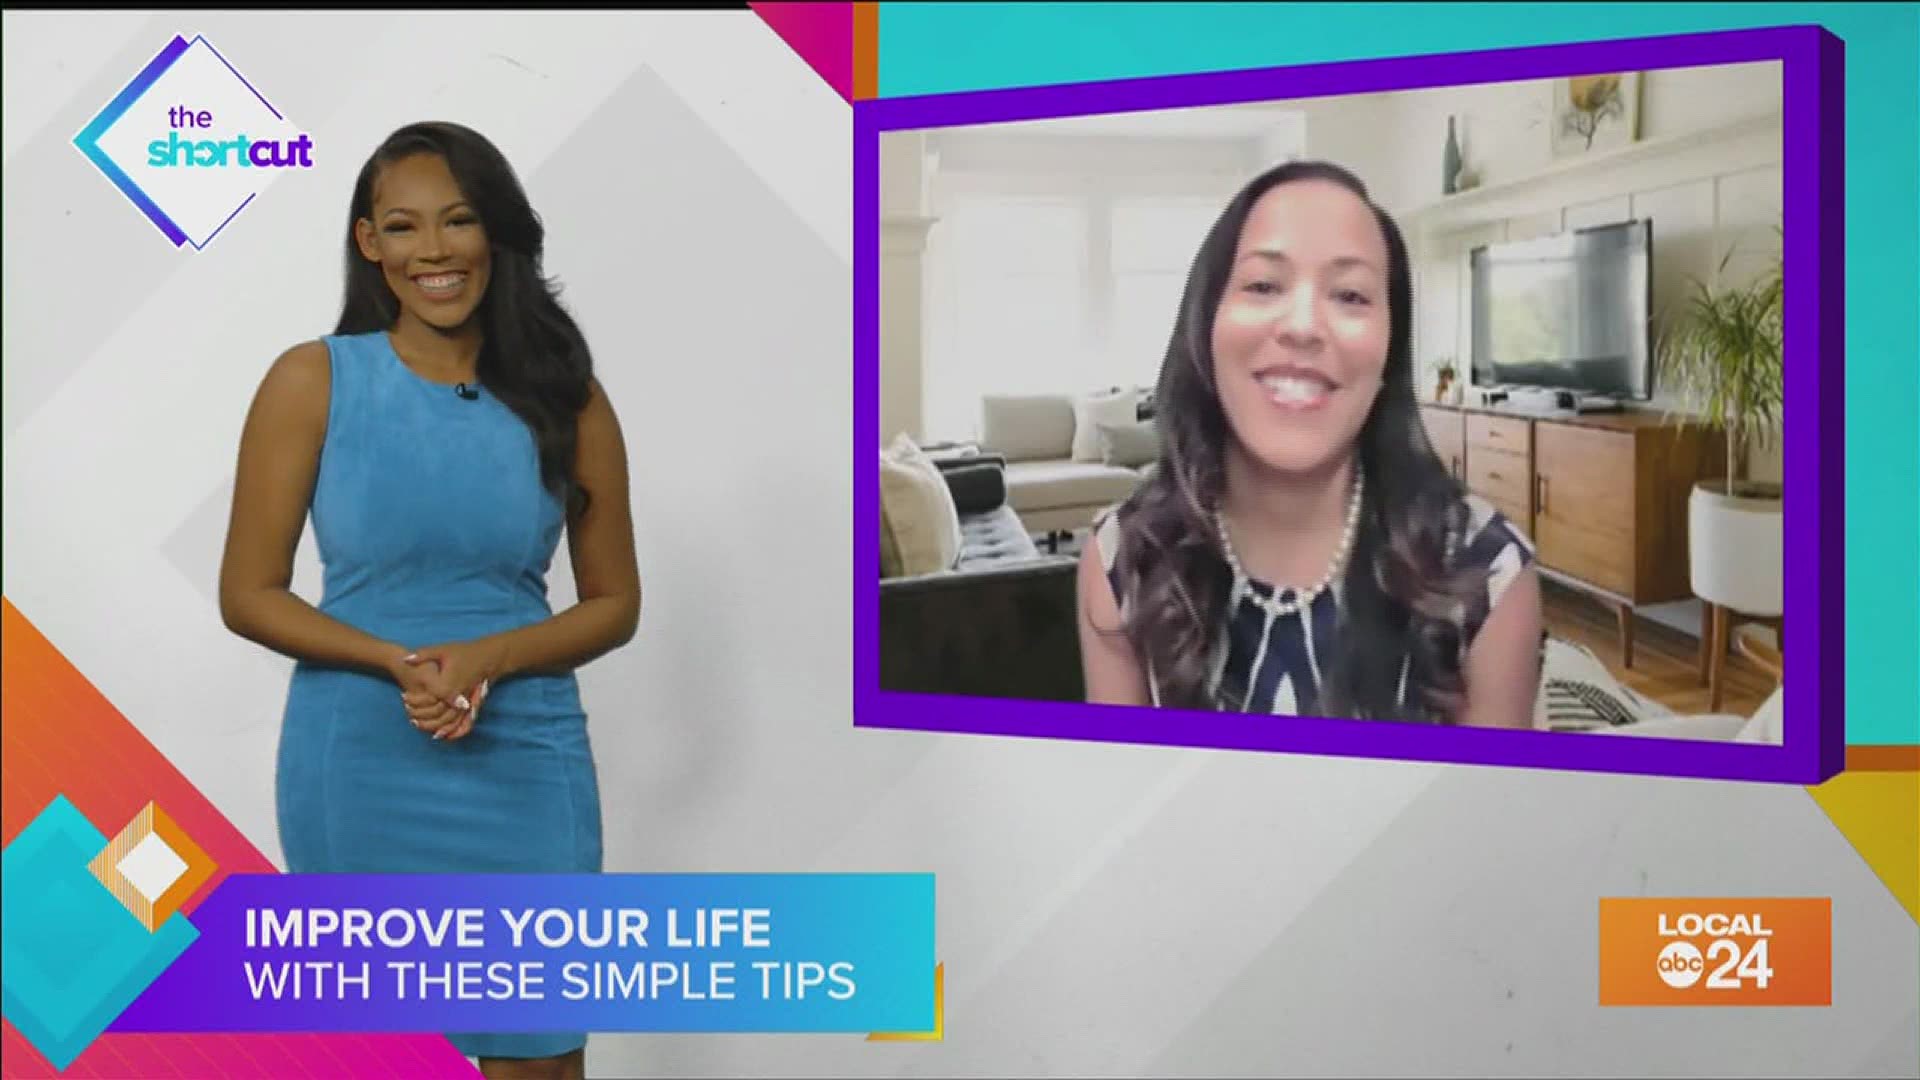 No matter what your life goal is, discovering your "one thing" holding you back truly makes a difference! Learn more on "The Shortcut" with life coach Danese Banks!